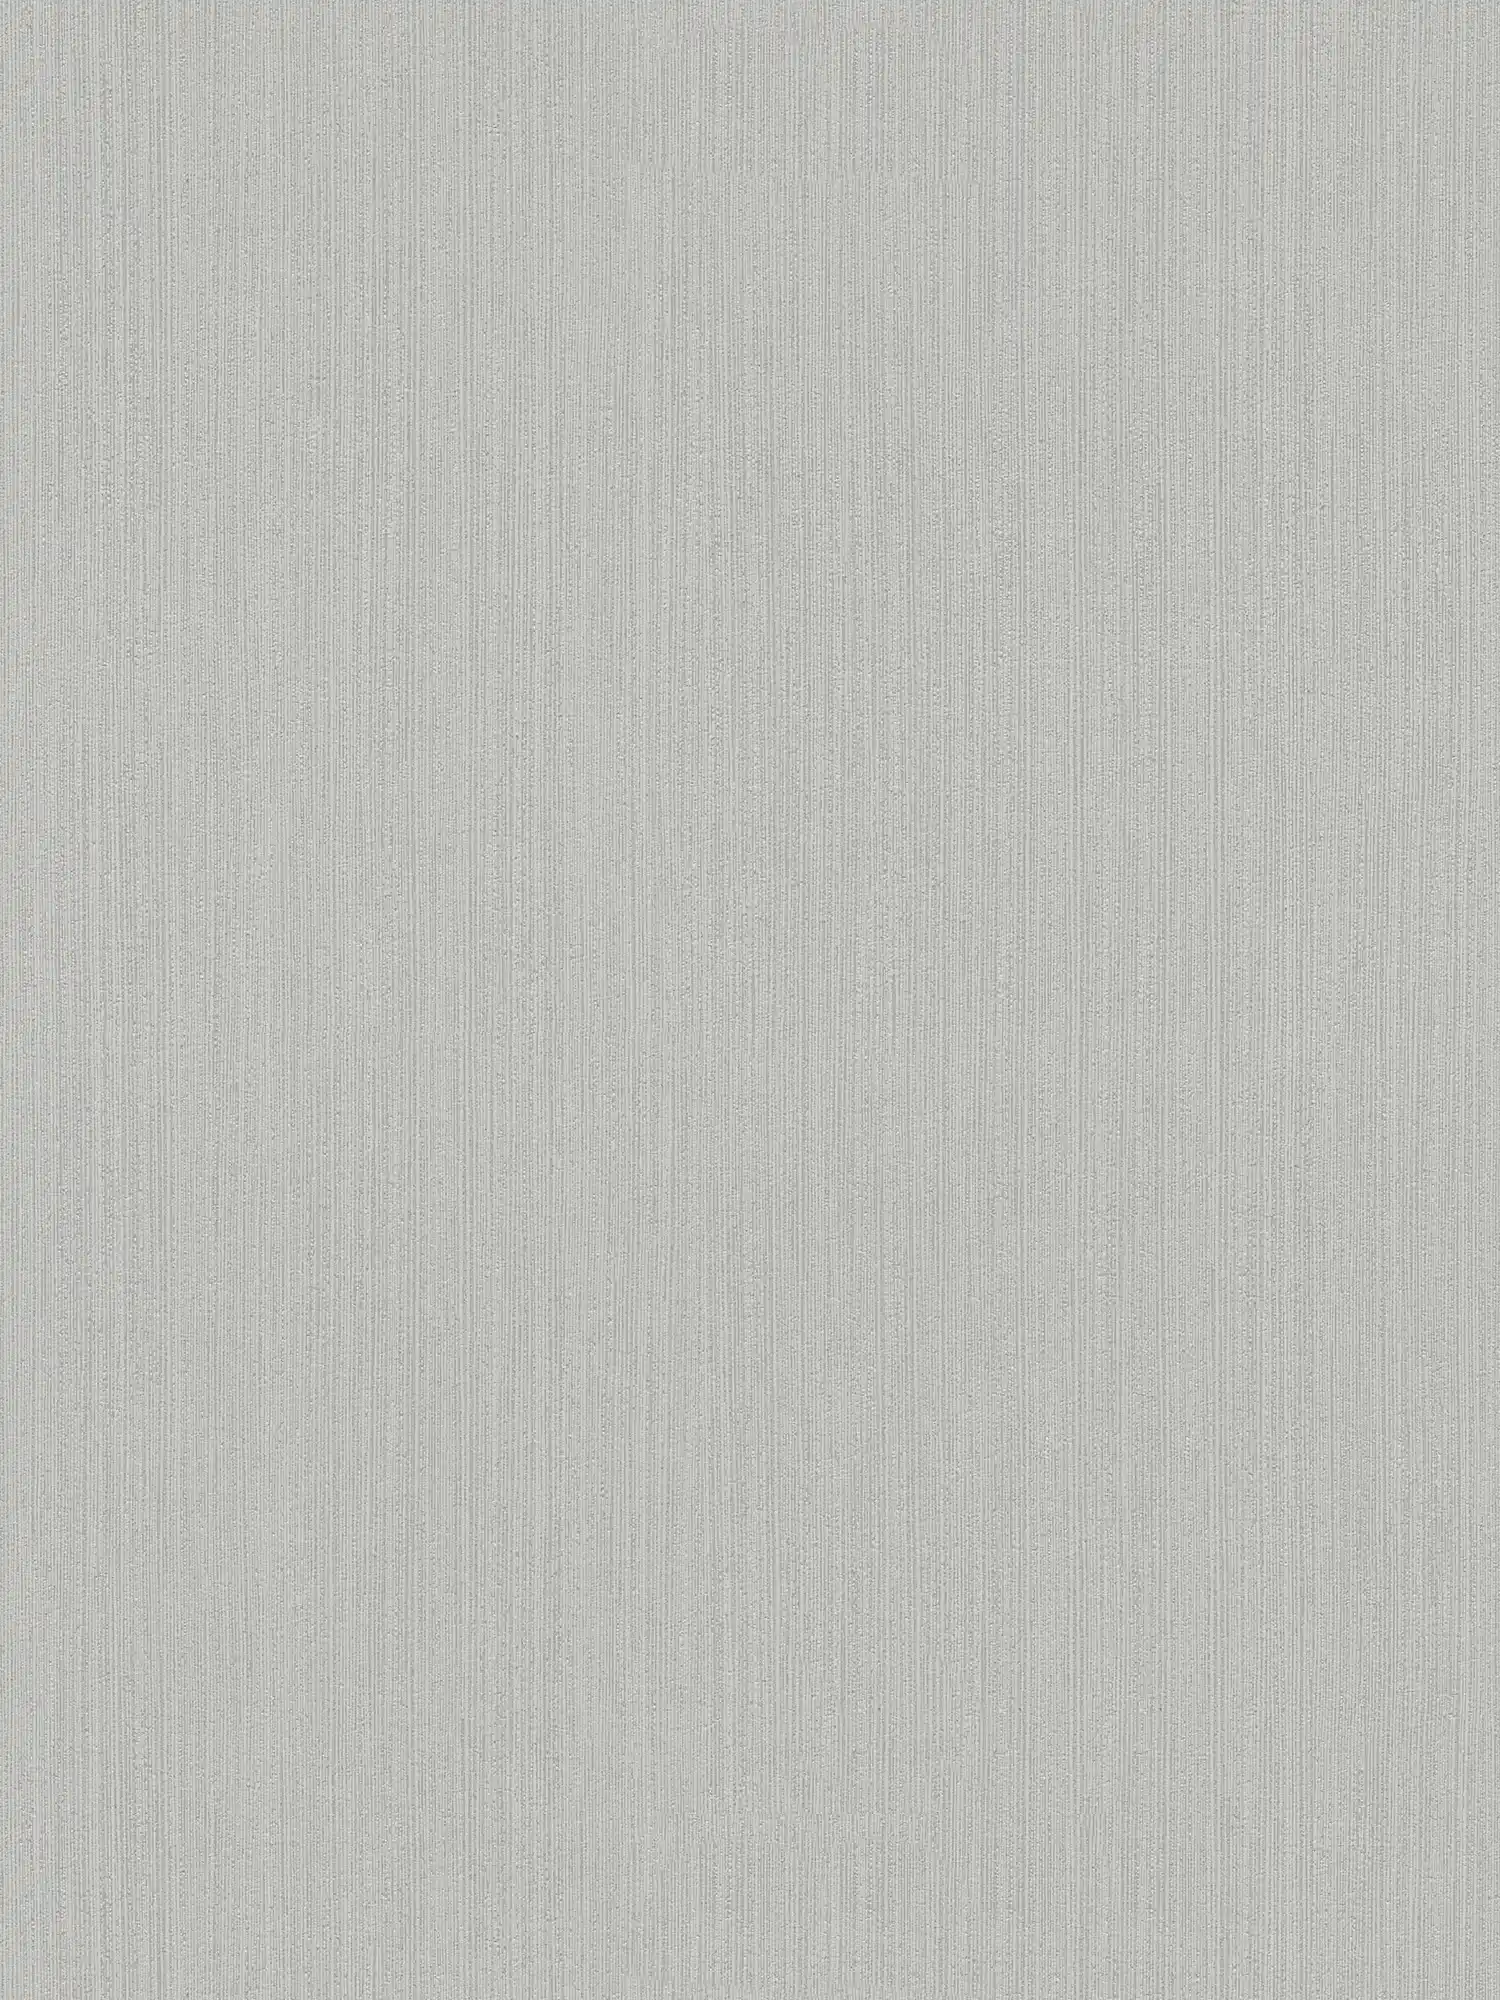 Neutral wallpaper plain with texture embossing - grey
